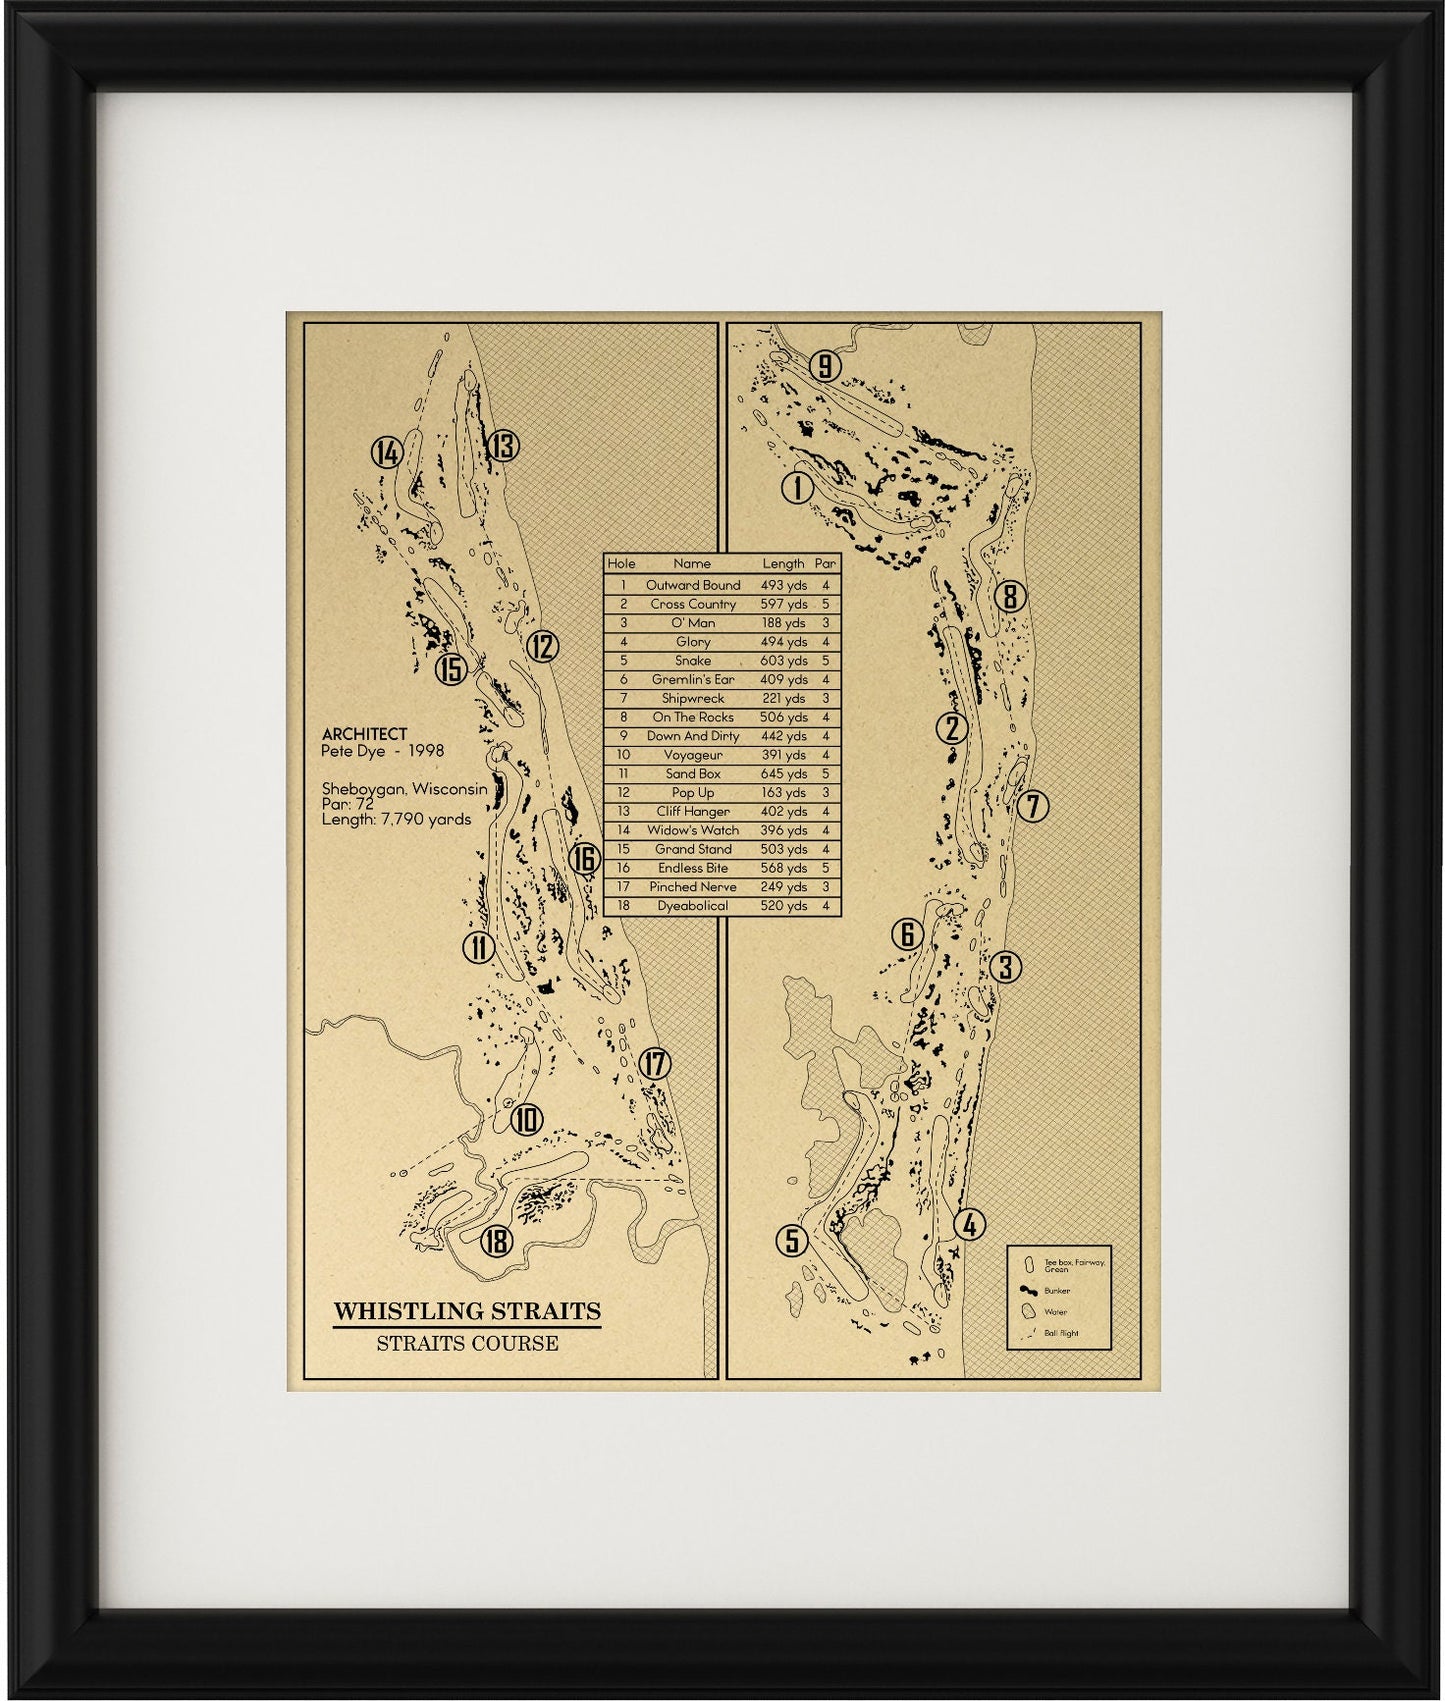 Whistling Straits - Straits Course Outline (Print)